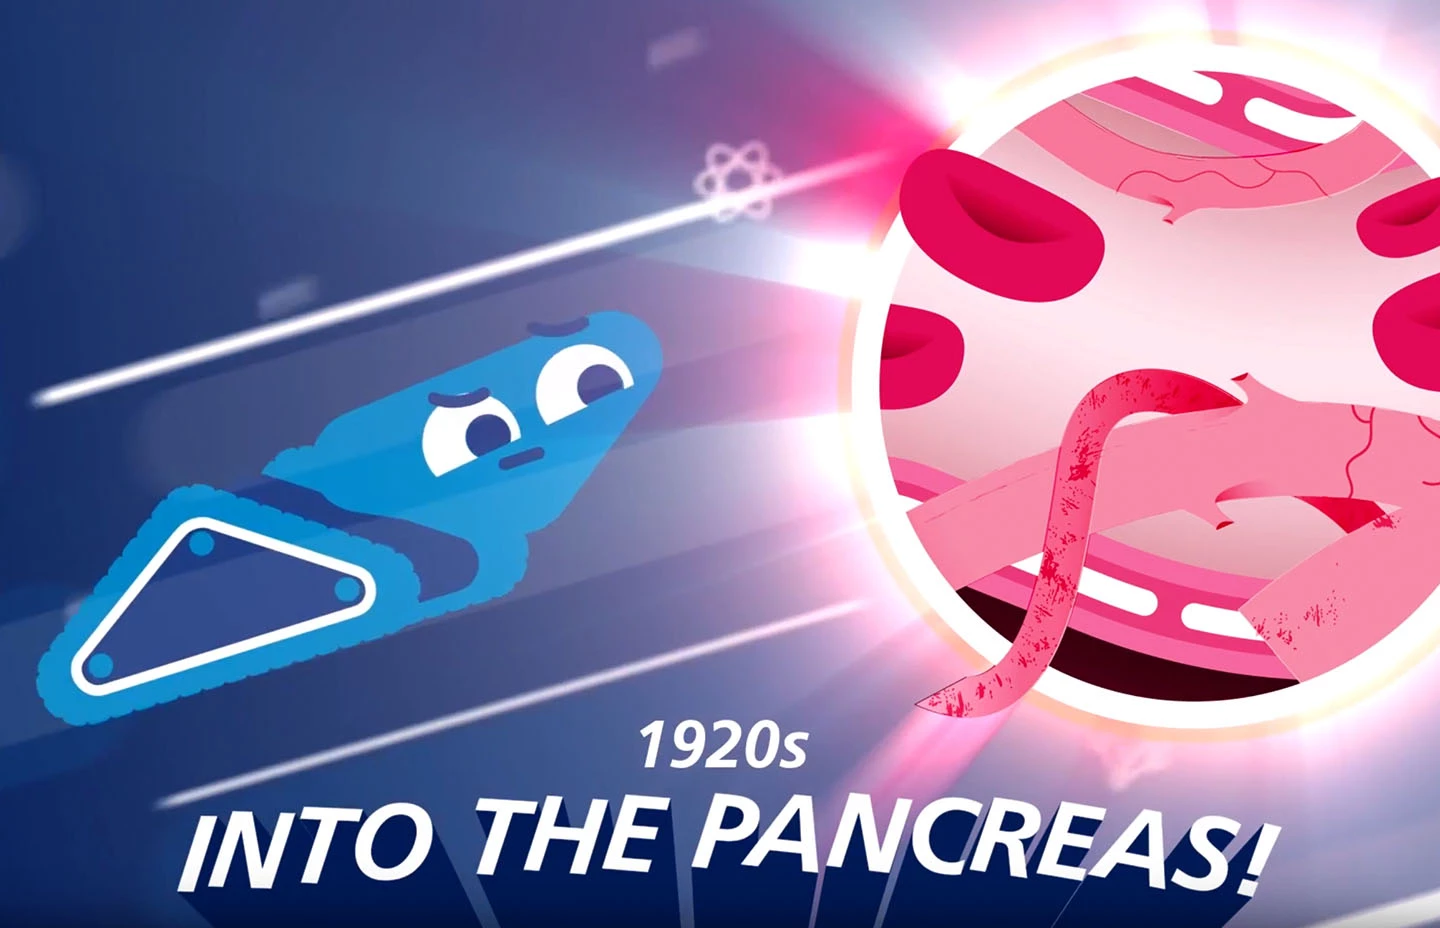 Blue avatar shooting towards a stylised representation of the pancreas with text 1920s - into the pancreas